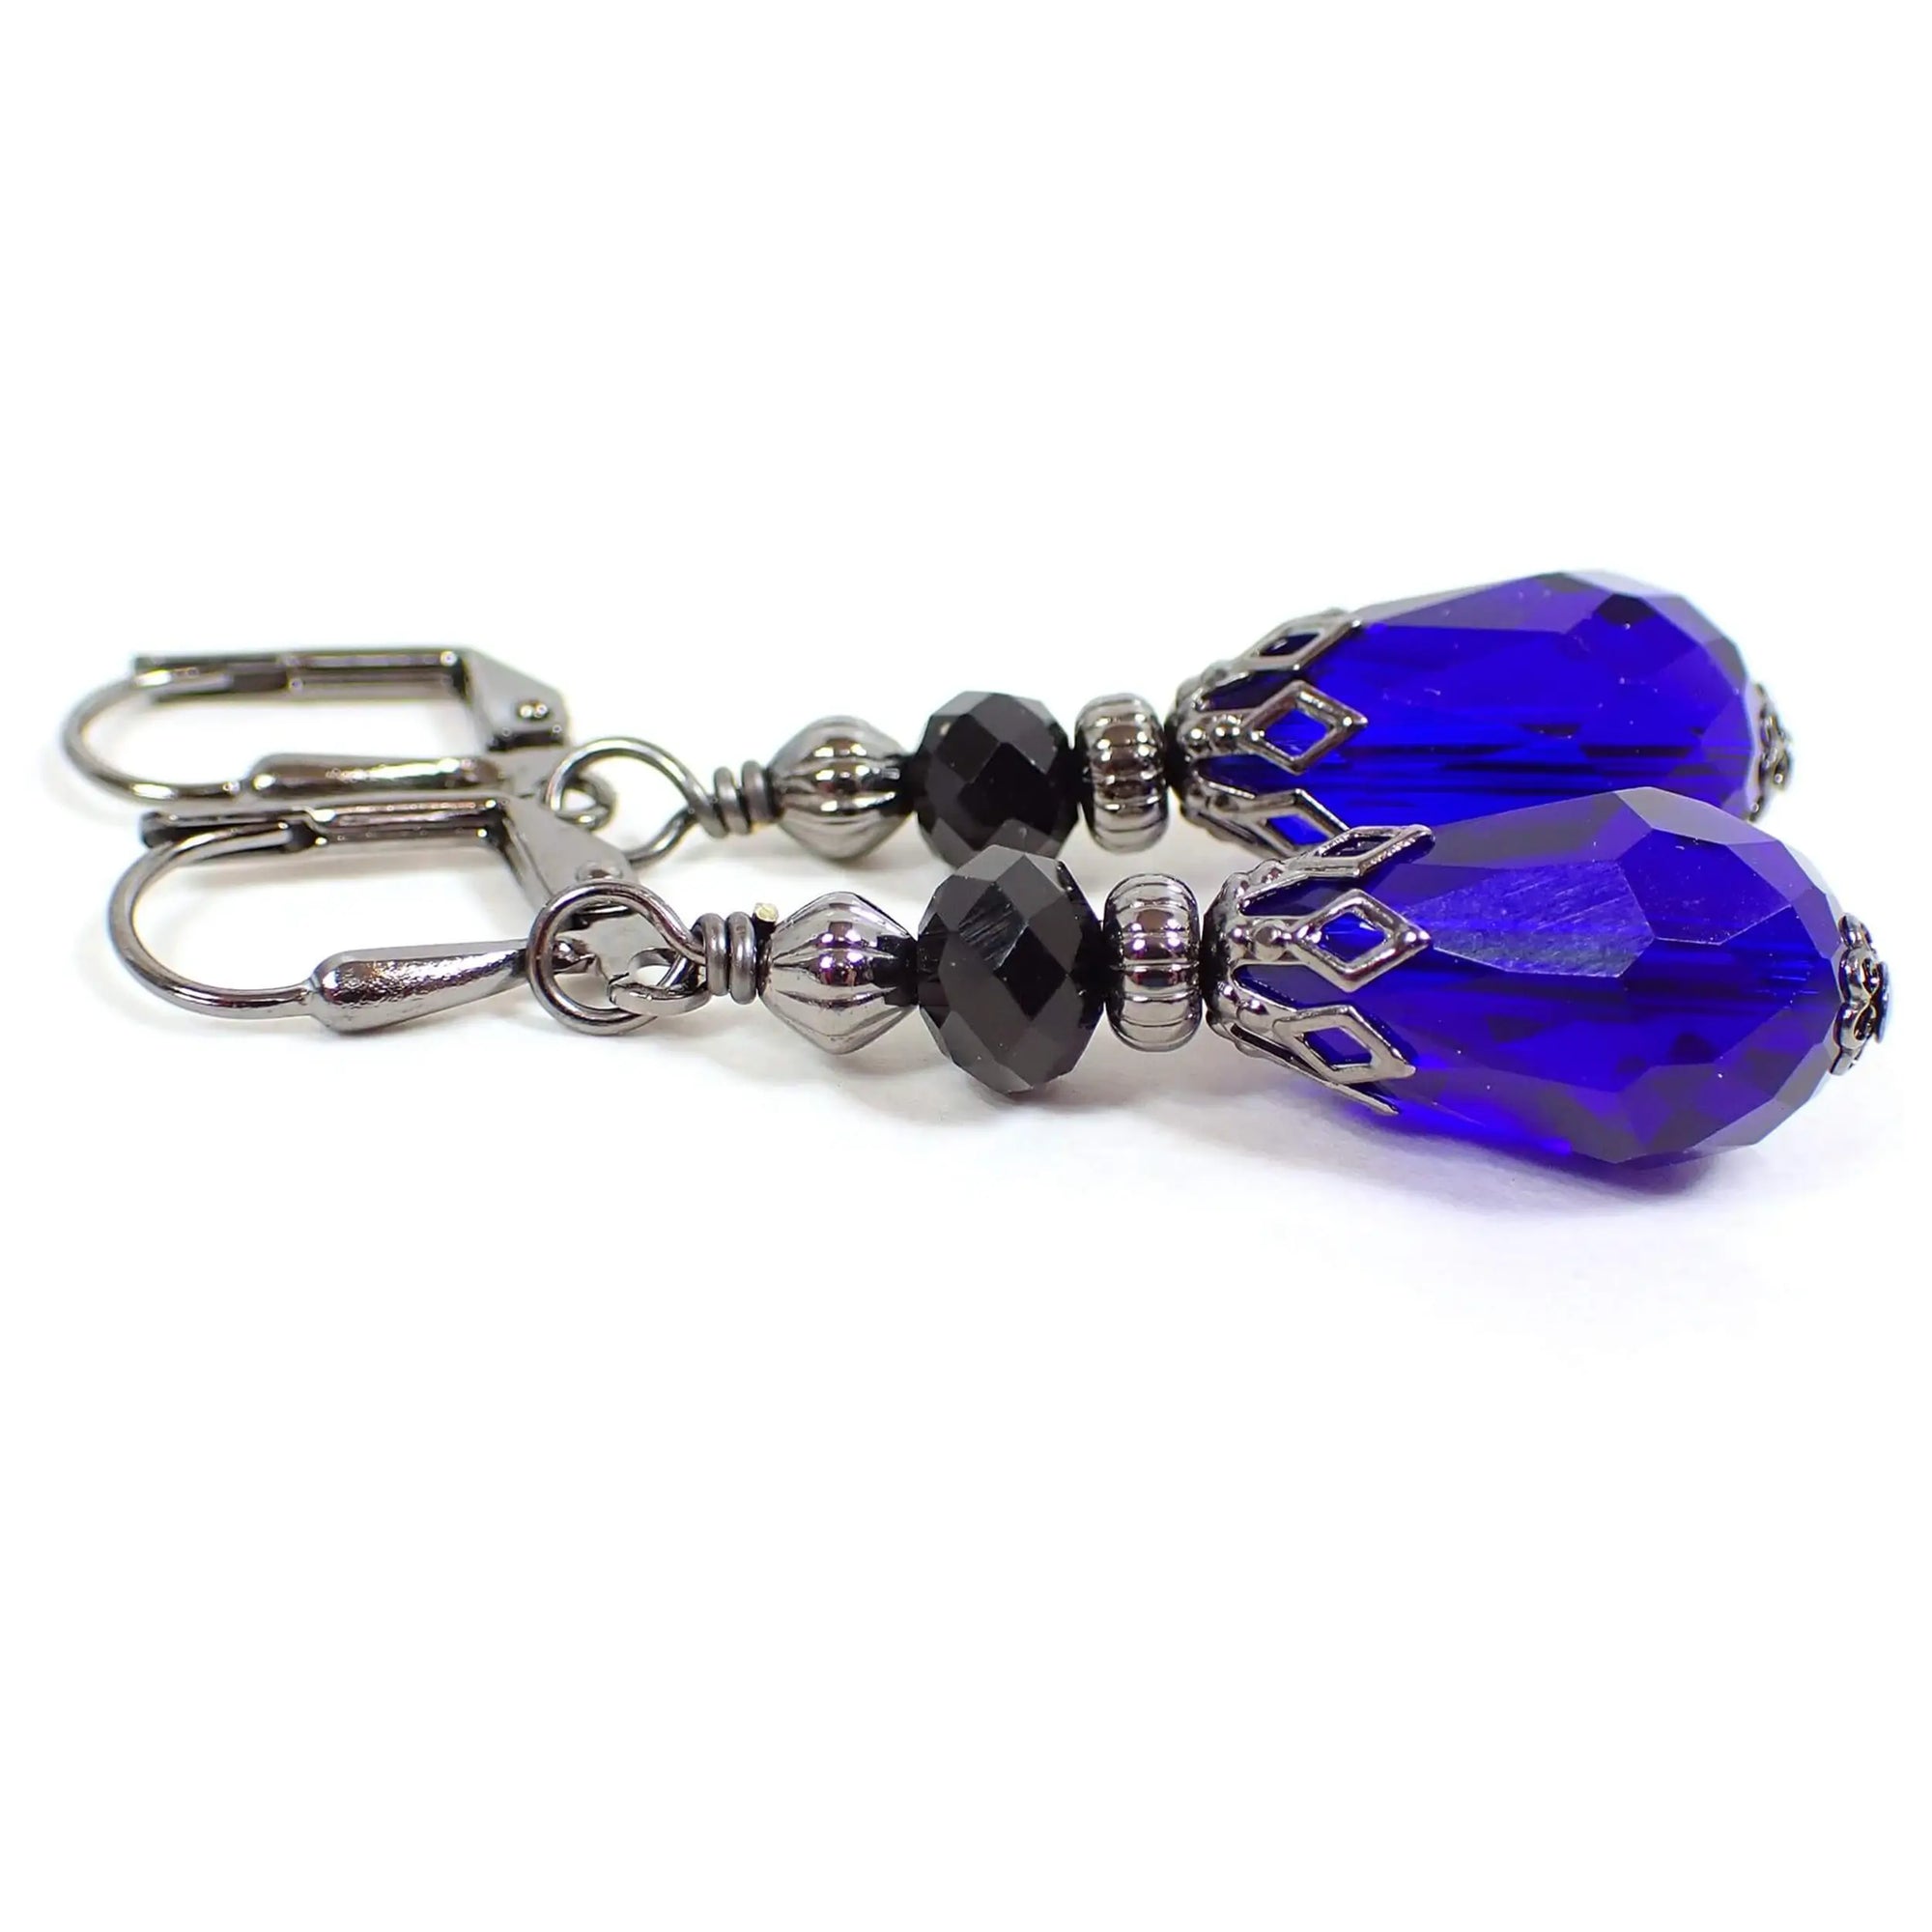 Side view of the handmade teardrop earrings. The metal is gunmetal gray in color. There are black faceted glass crystal beads at the top. The bottom beads are teardrop shaped faceted glass crystal and are a vibrant cobalt blue in color.